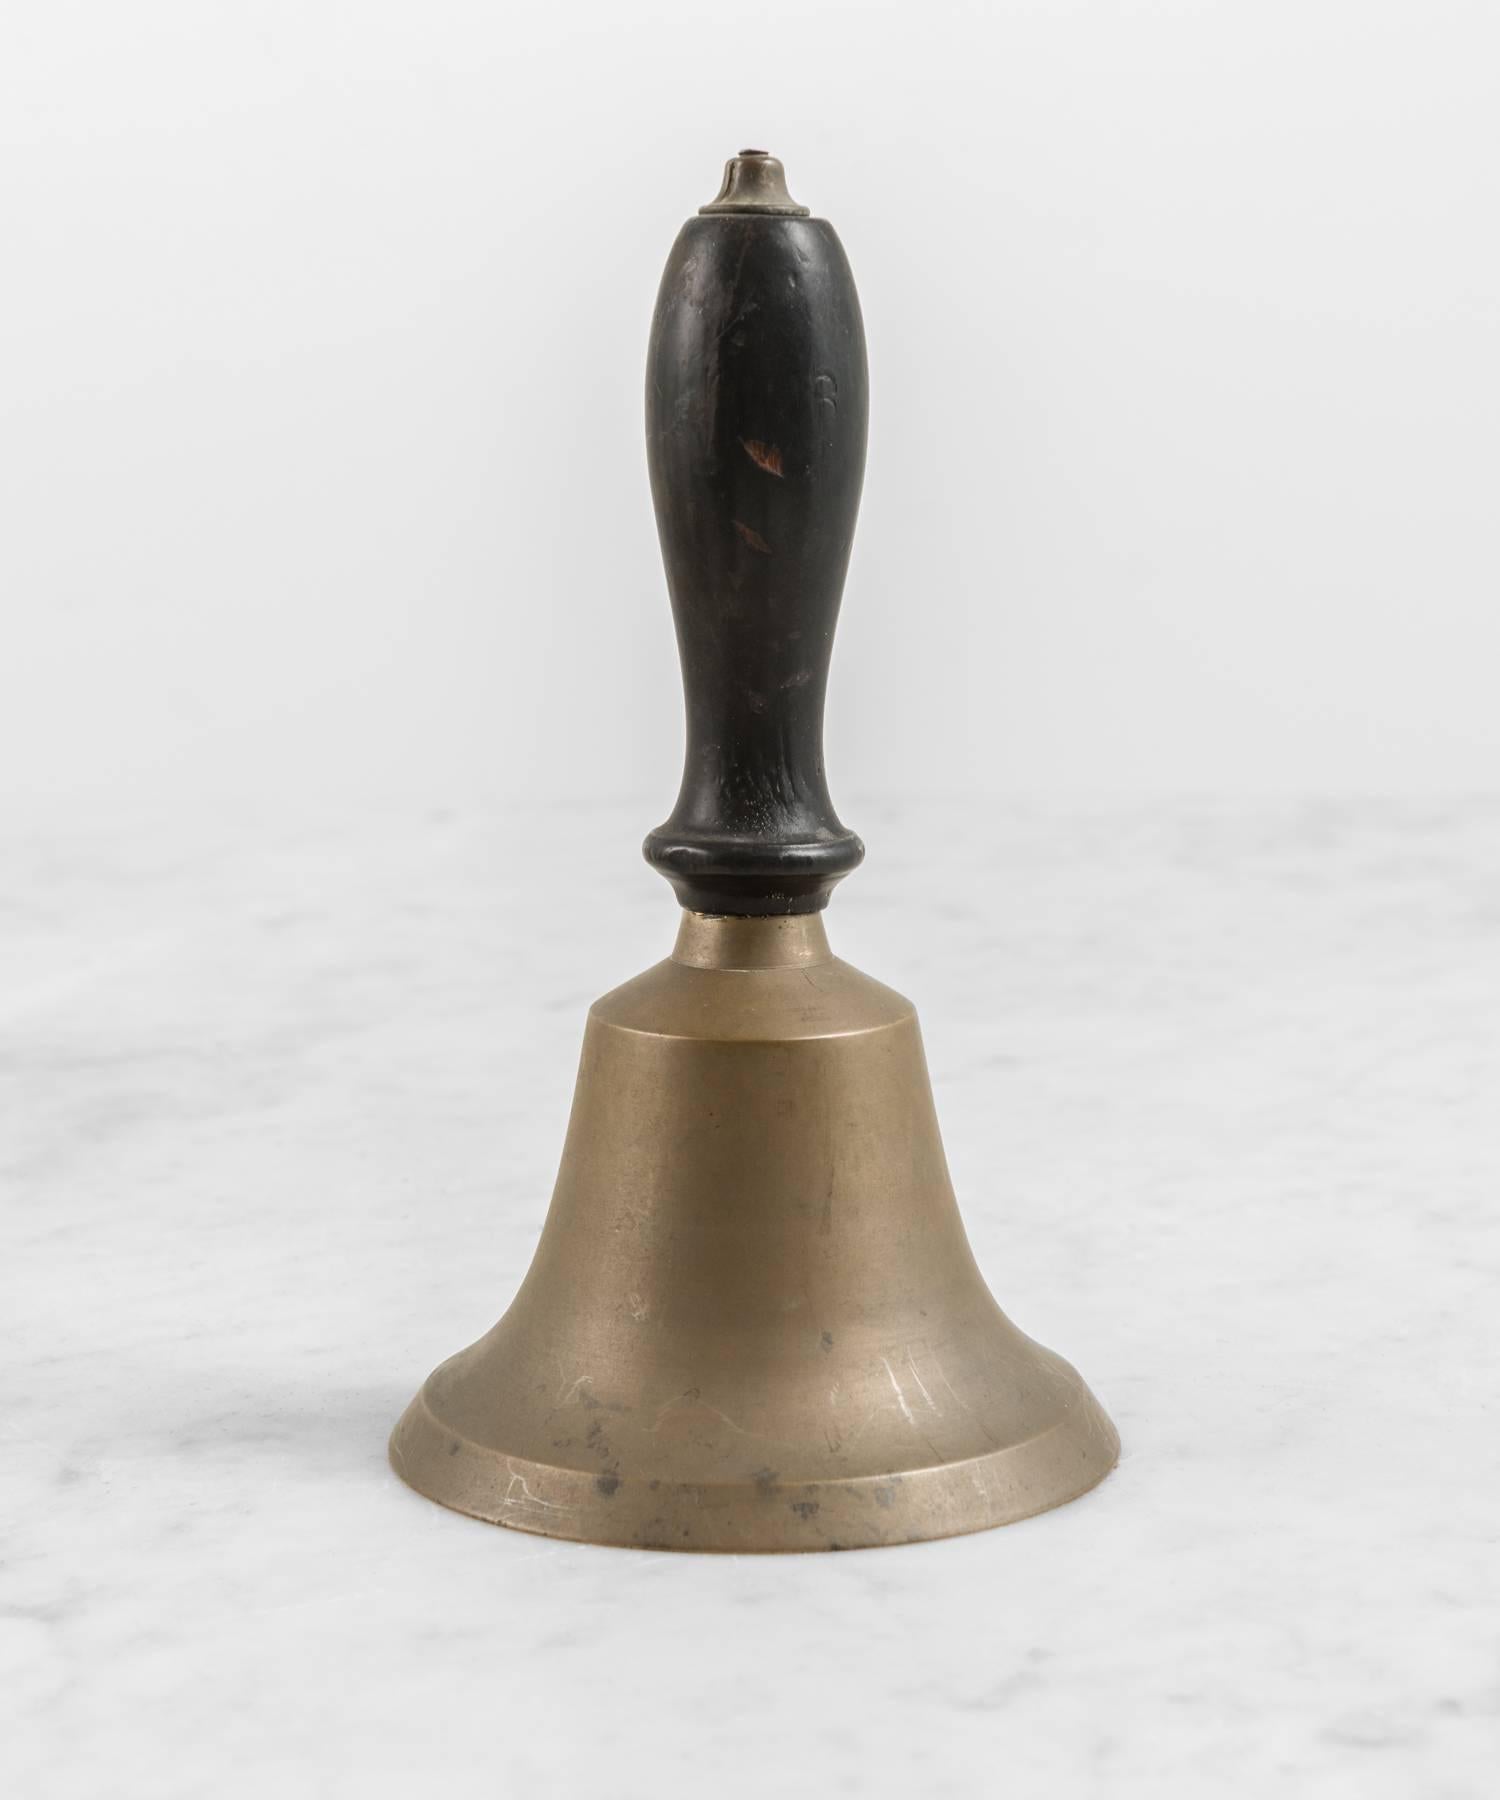 Medium Sized Bell with Wooden Handle, circa 1900-1940 1